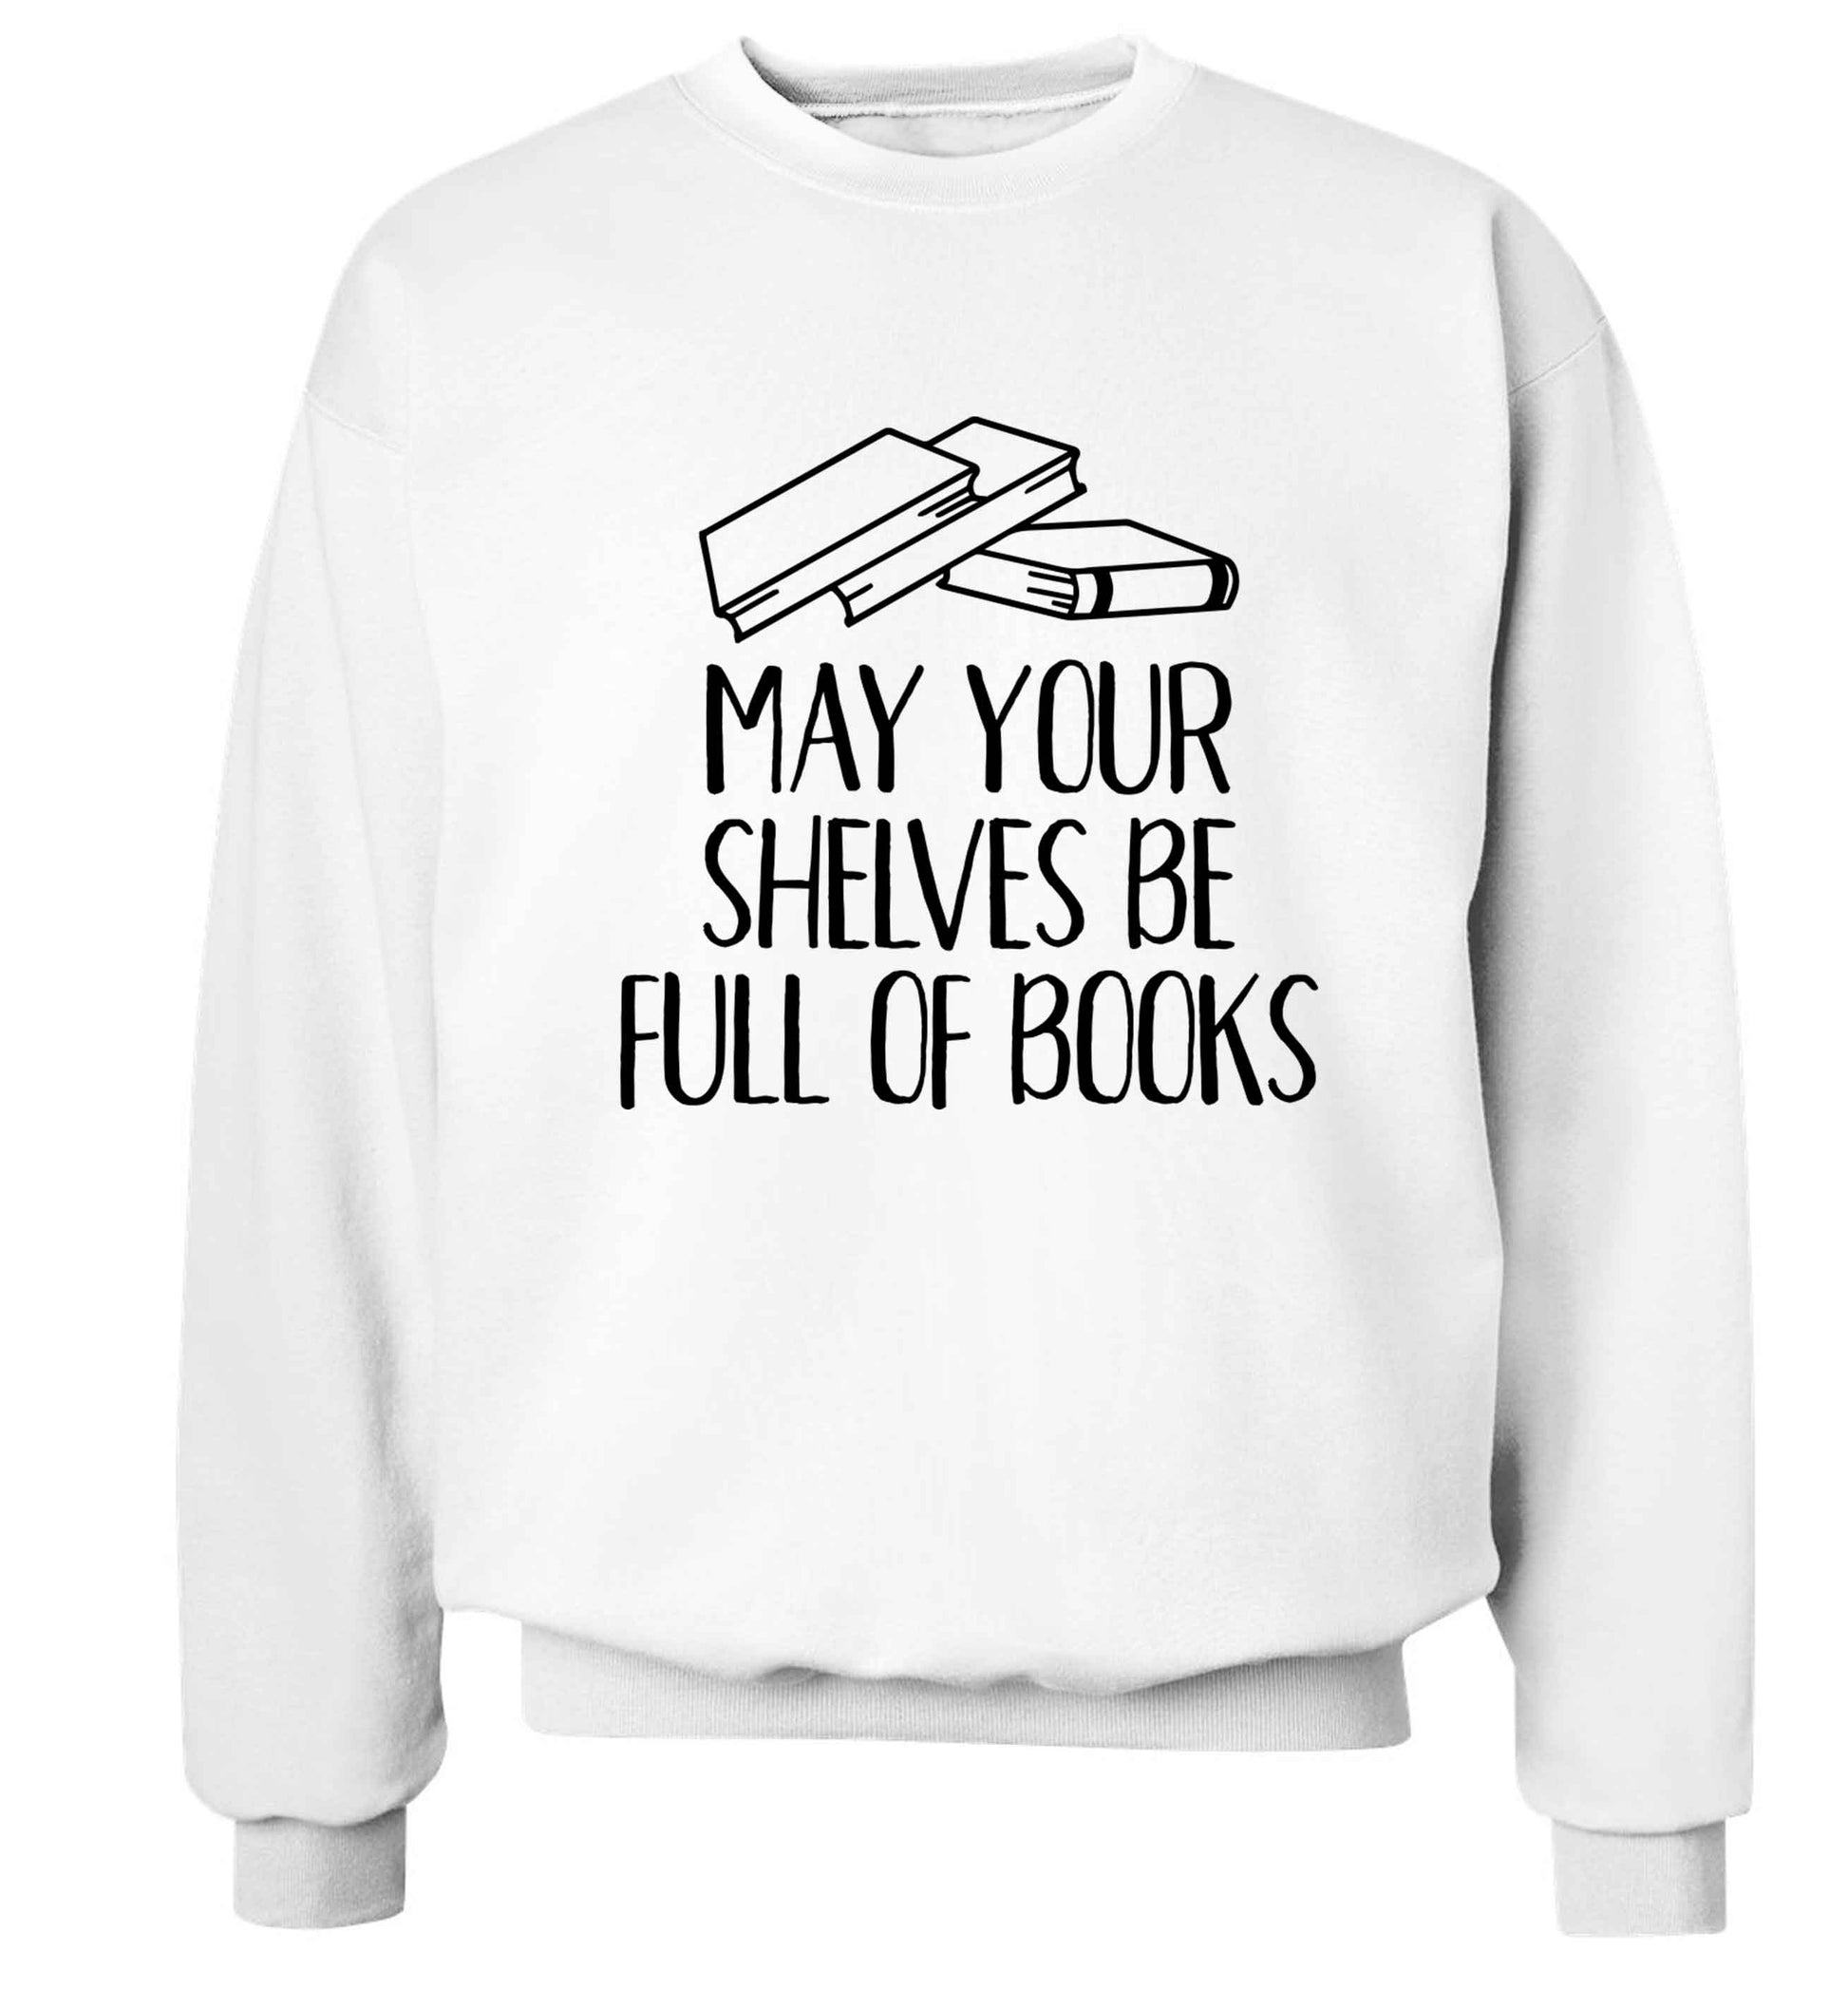 May your shelves be full of books Adult's unisex white Sweater 2XL